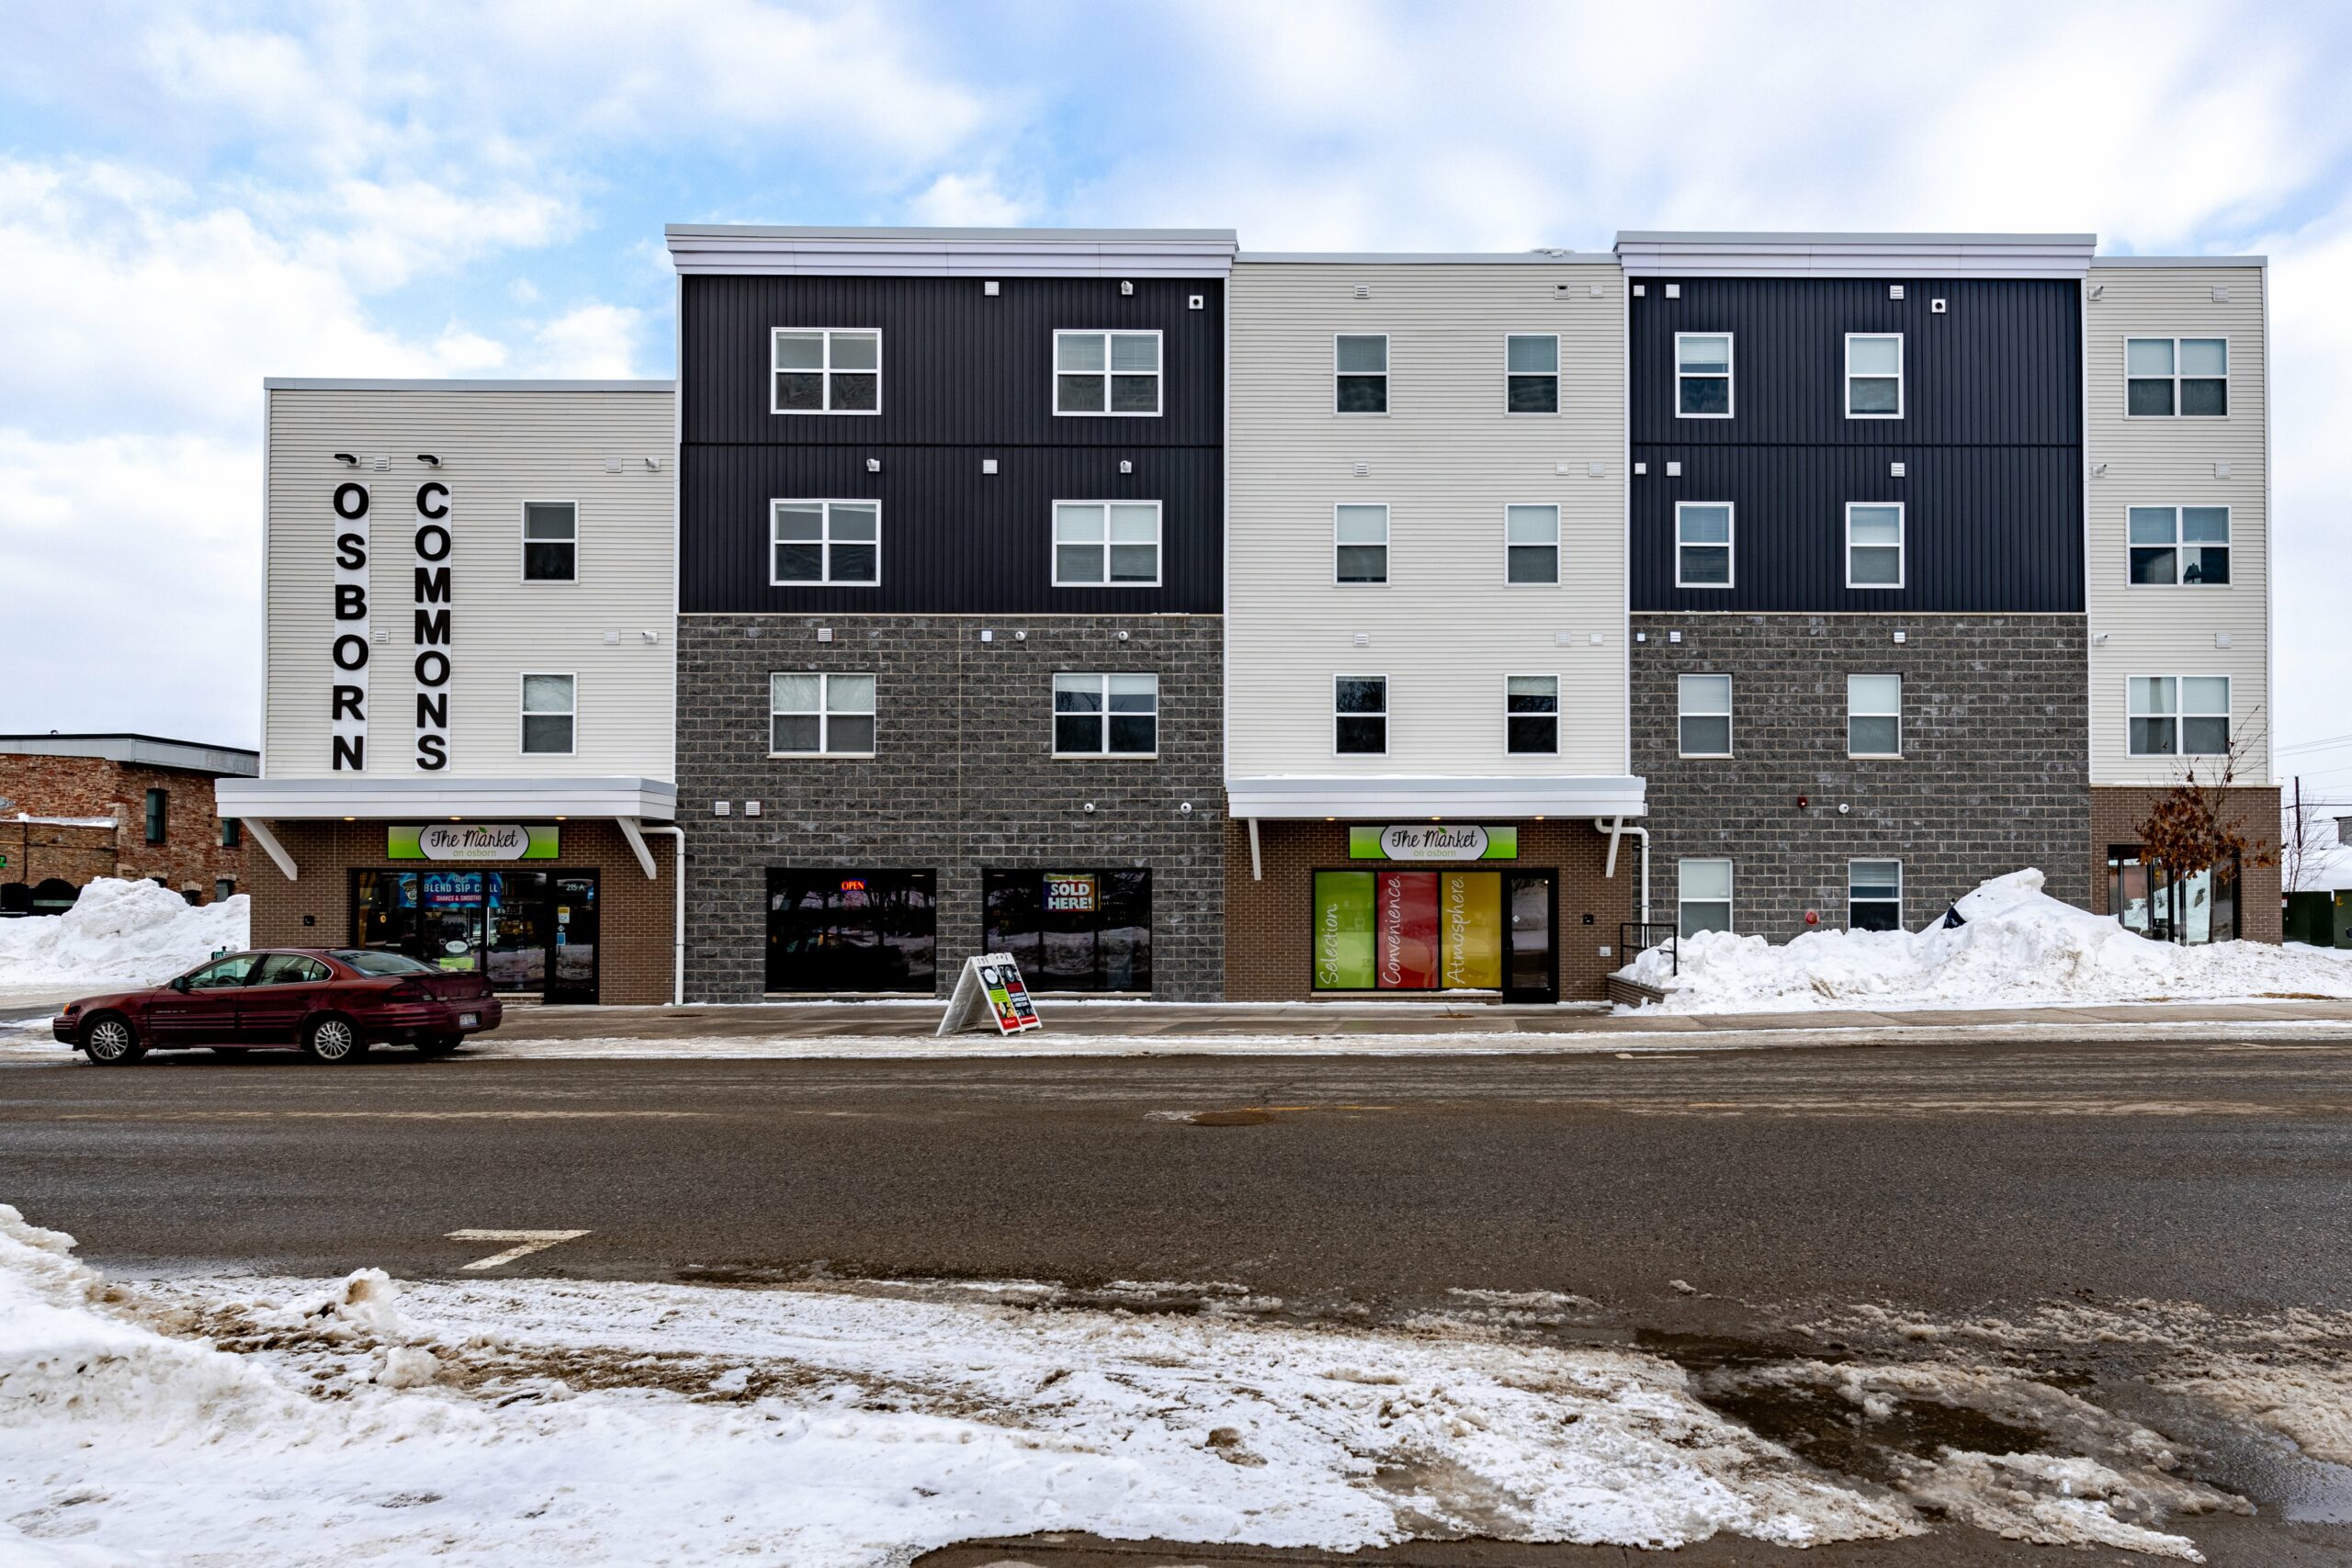 Ground level view of the apartment building, Osborn Commons and building's market storefront on a winter day